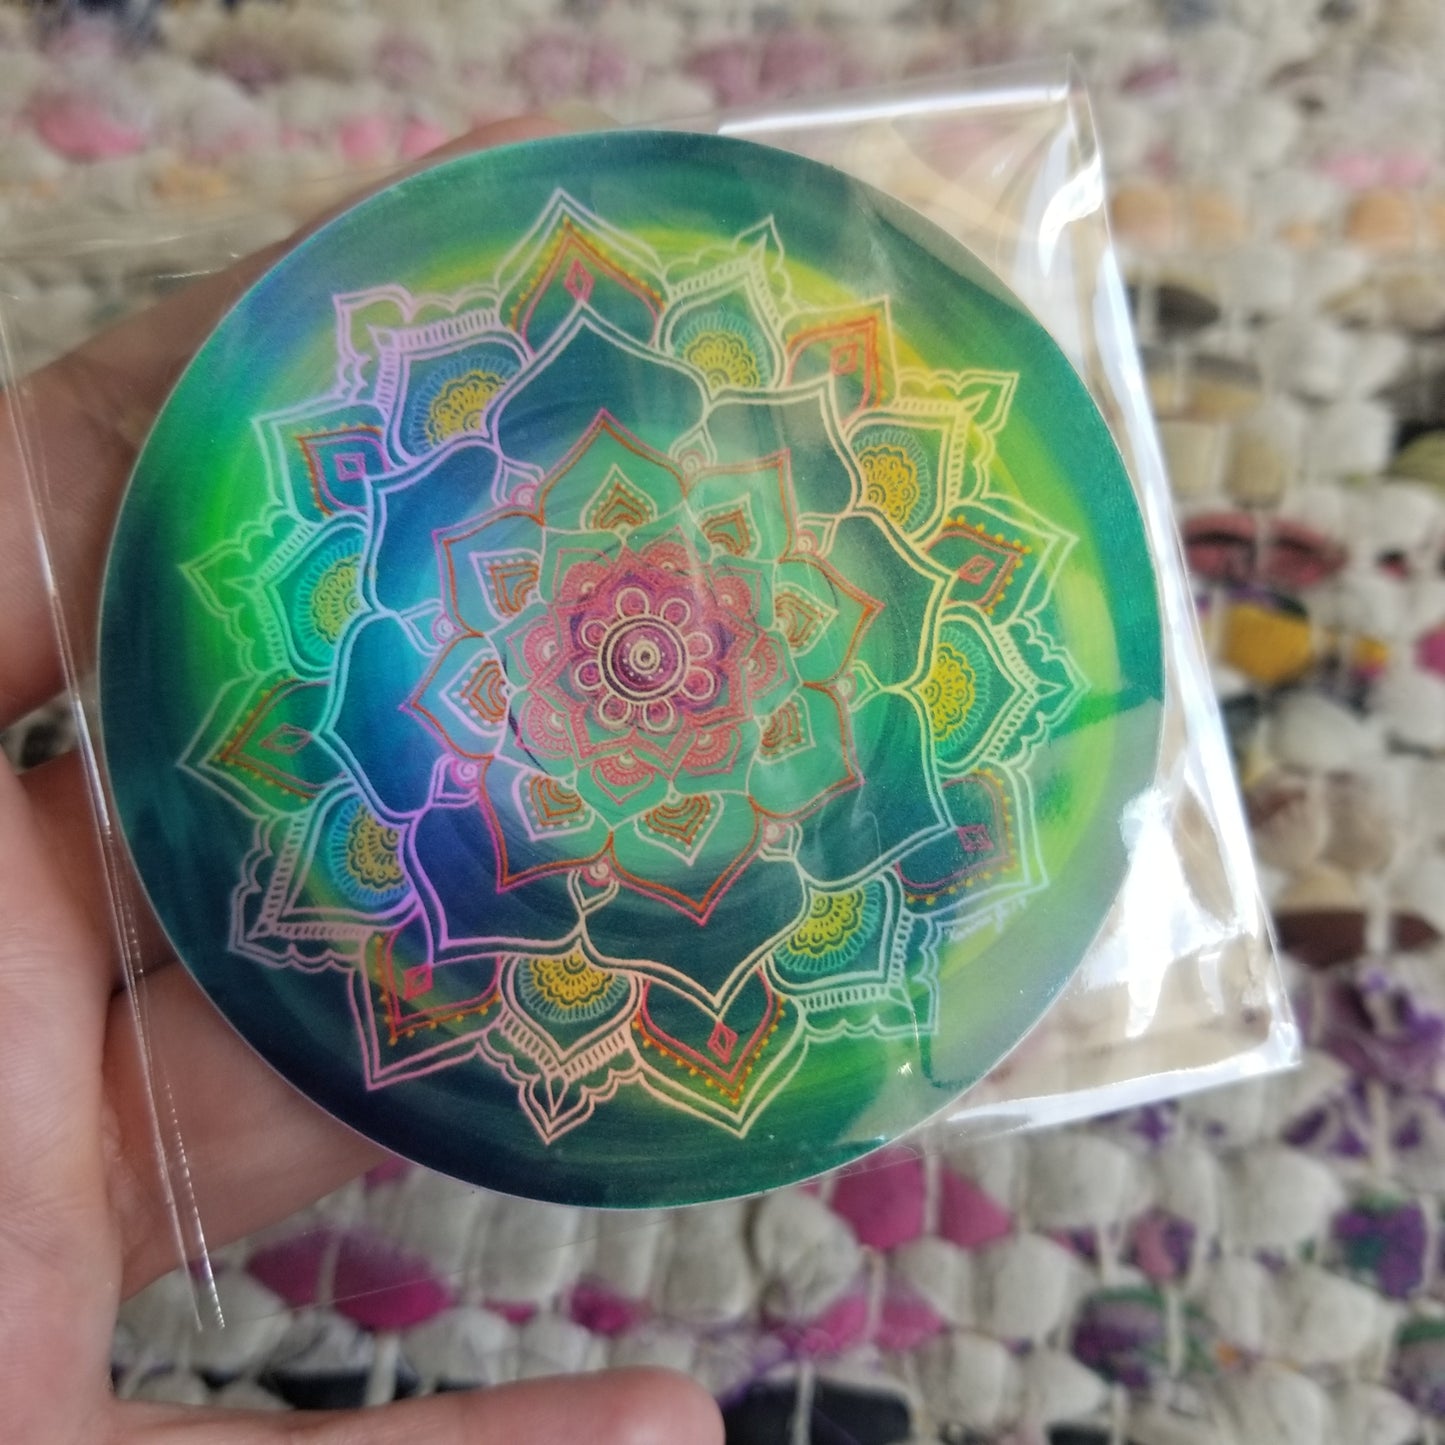 The Next Phase Holographic Waterproof Art Sticker